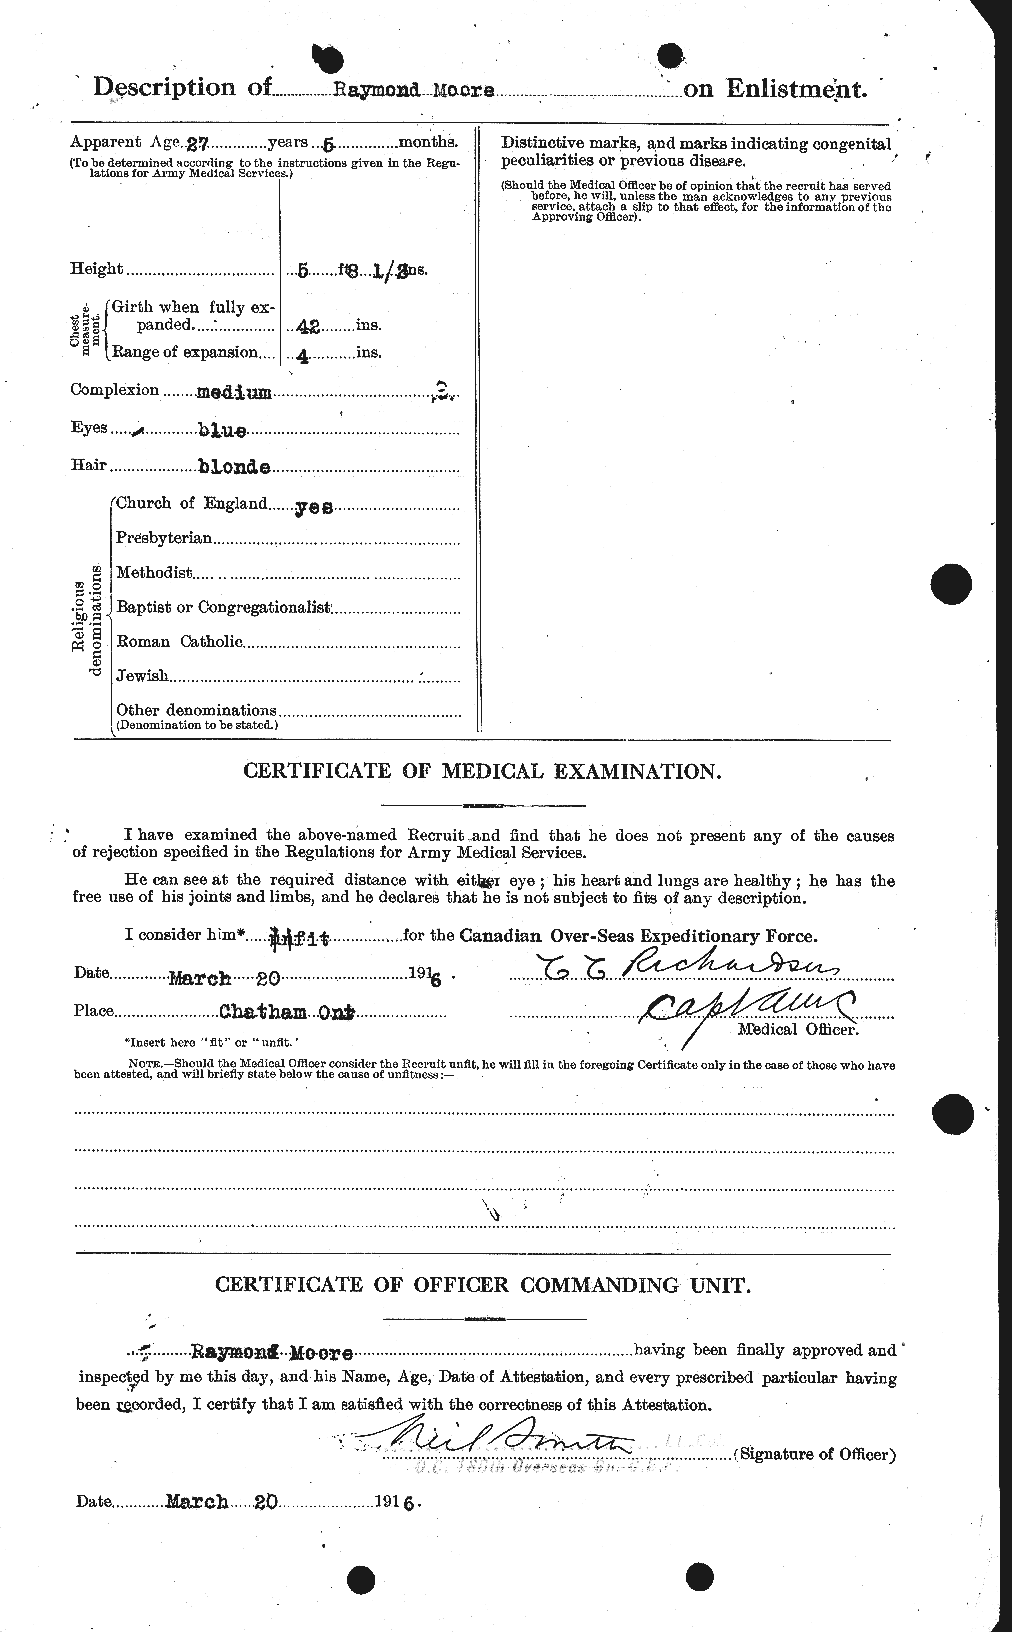 Personnel Records of the First World War - CEF 503519b